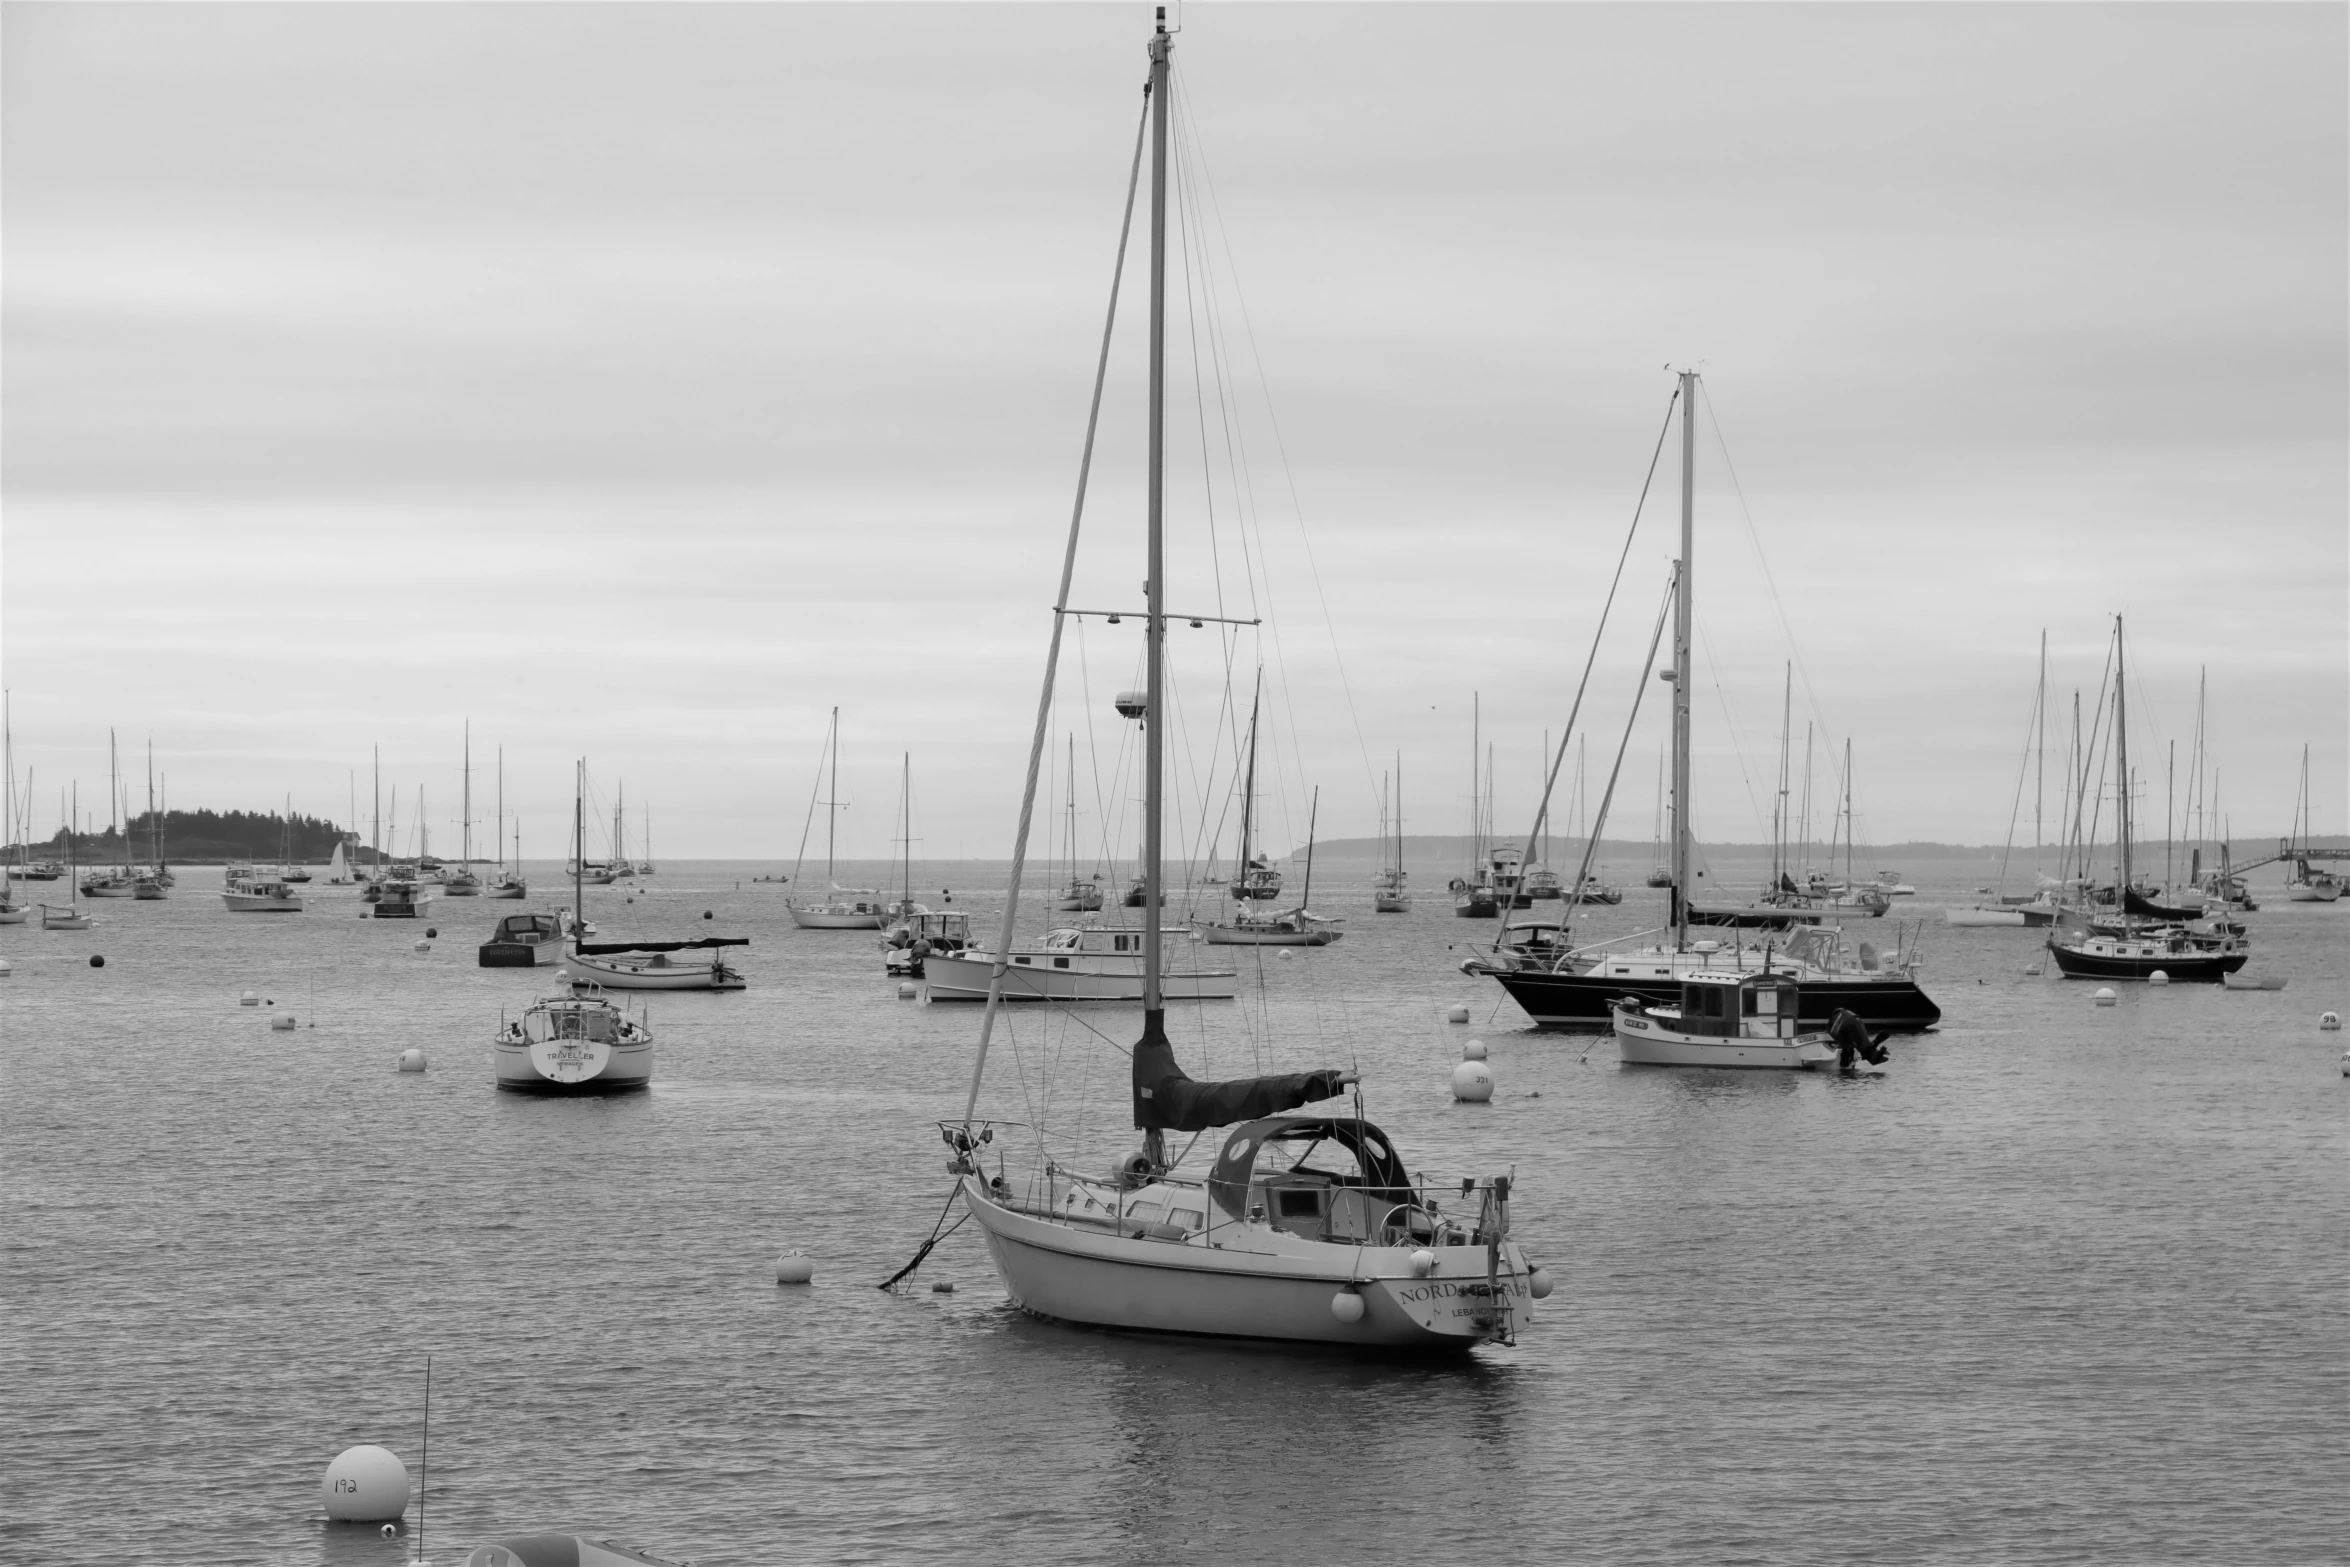 a large body of water filled with sailboats